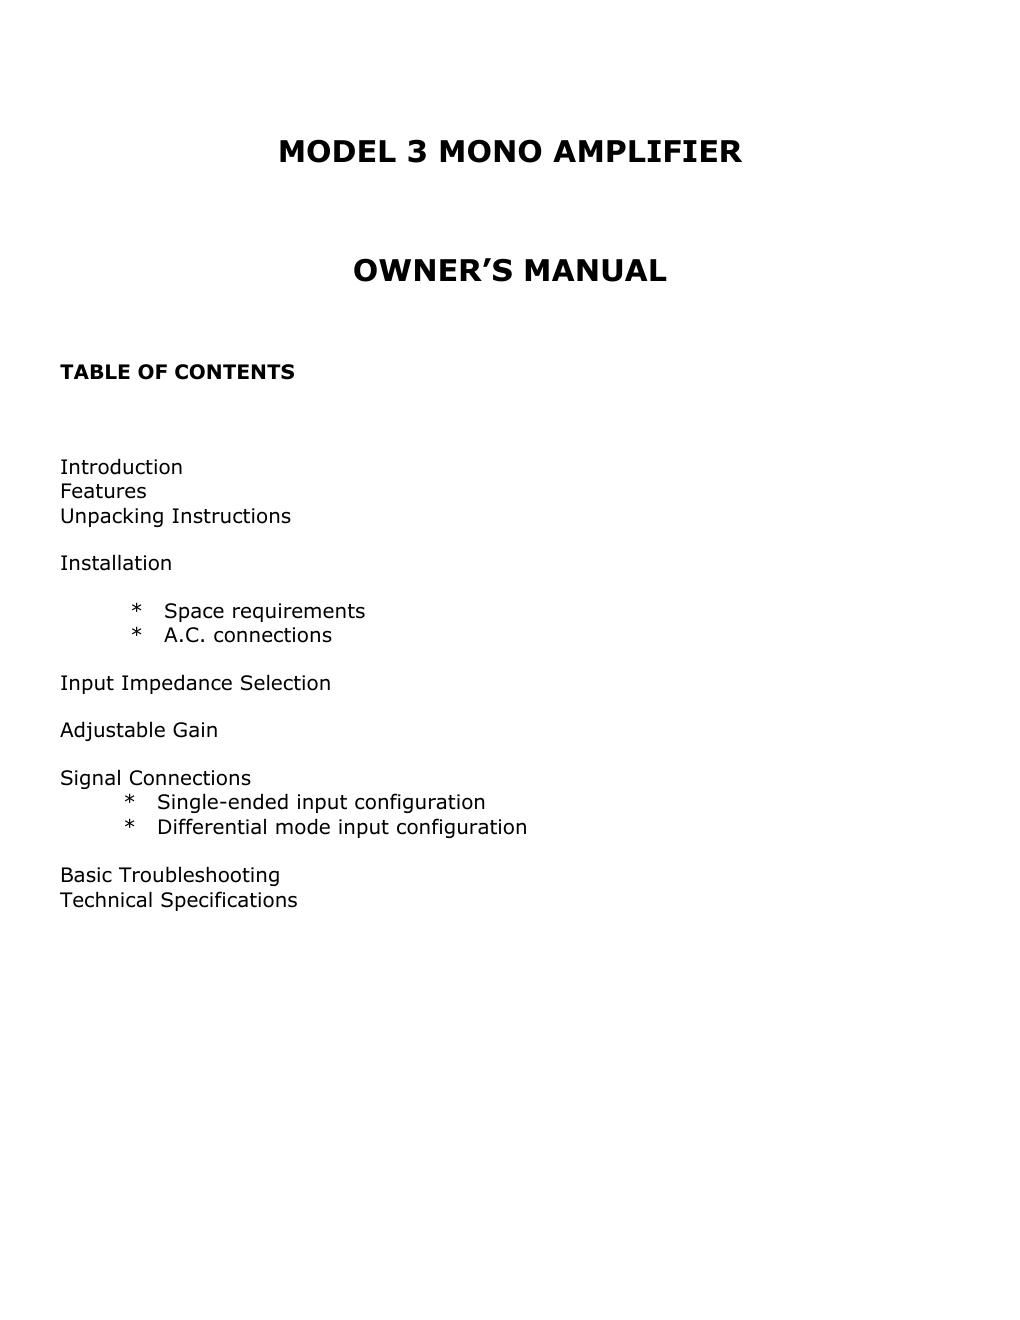 jeff rowland m 3 owners manual